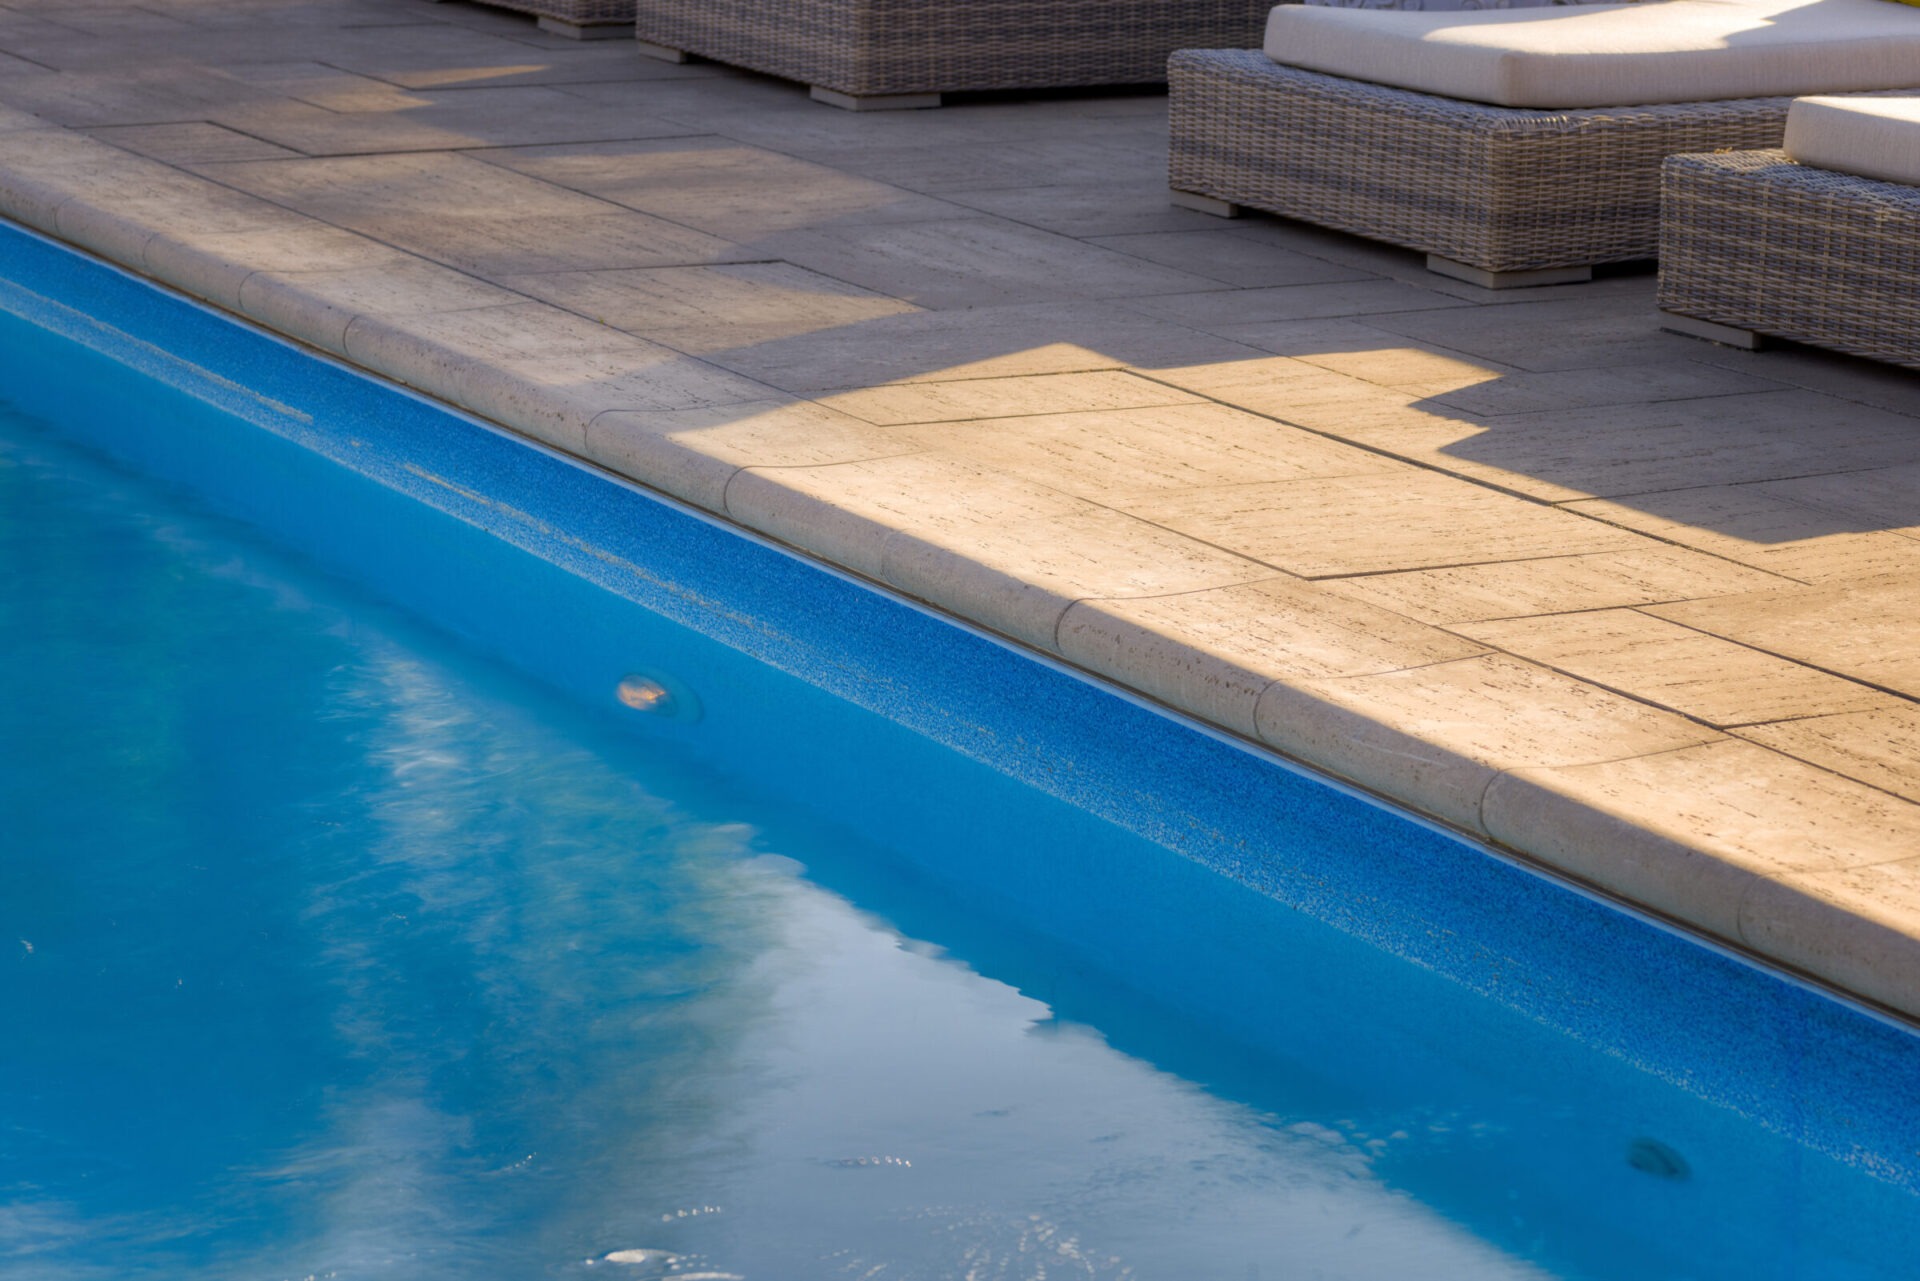 A serene pool with calm blue water adjacent to a beige tiled deck, shaded by lounges, reflecting a clear sky, conveying relaxation and tranquility.